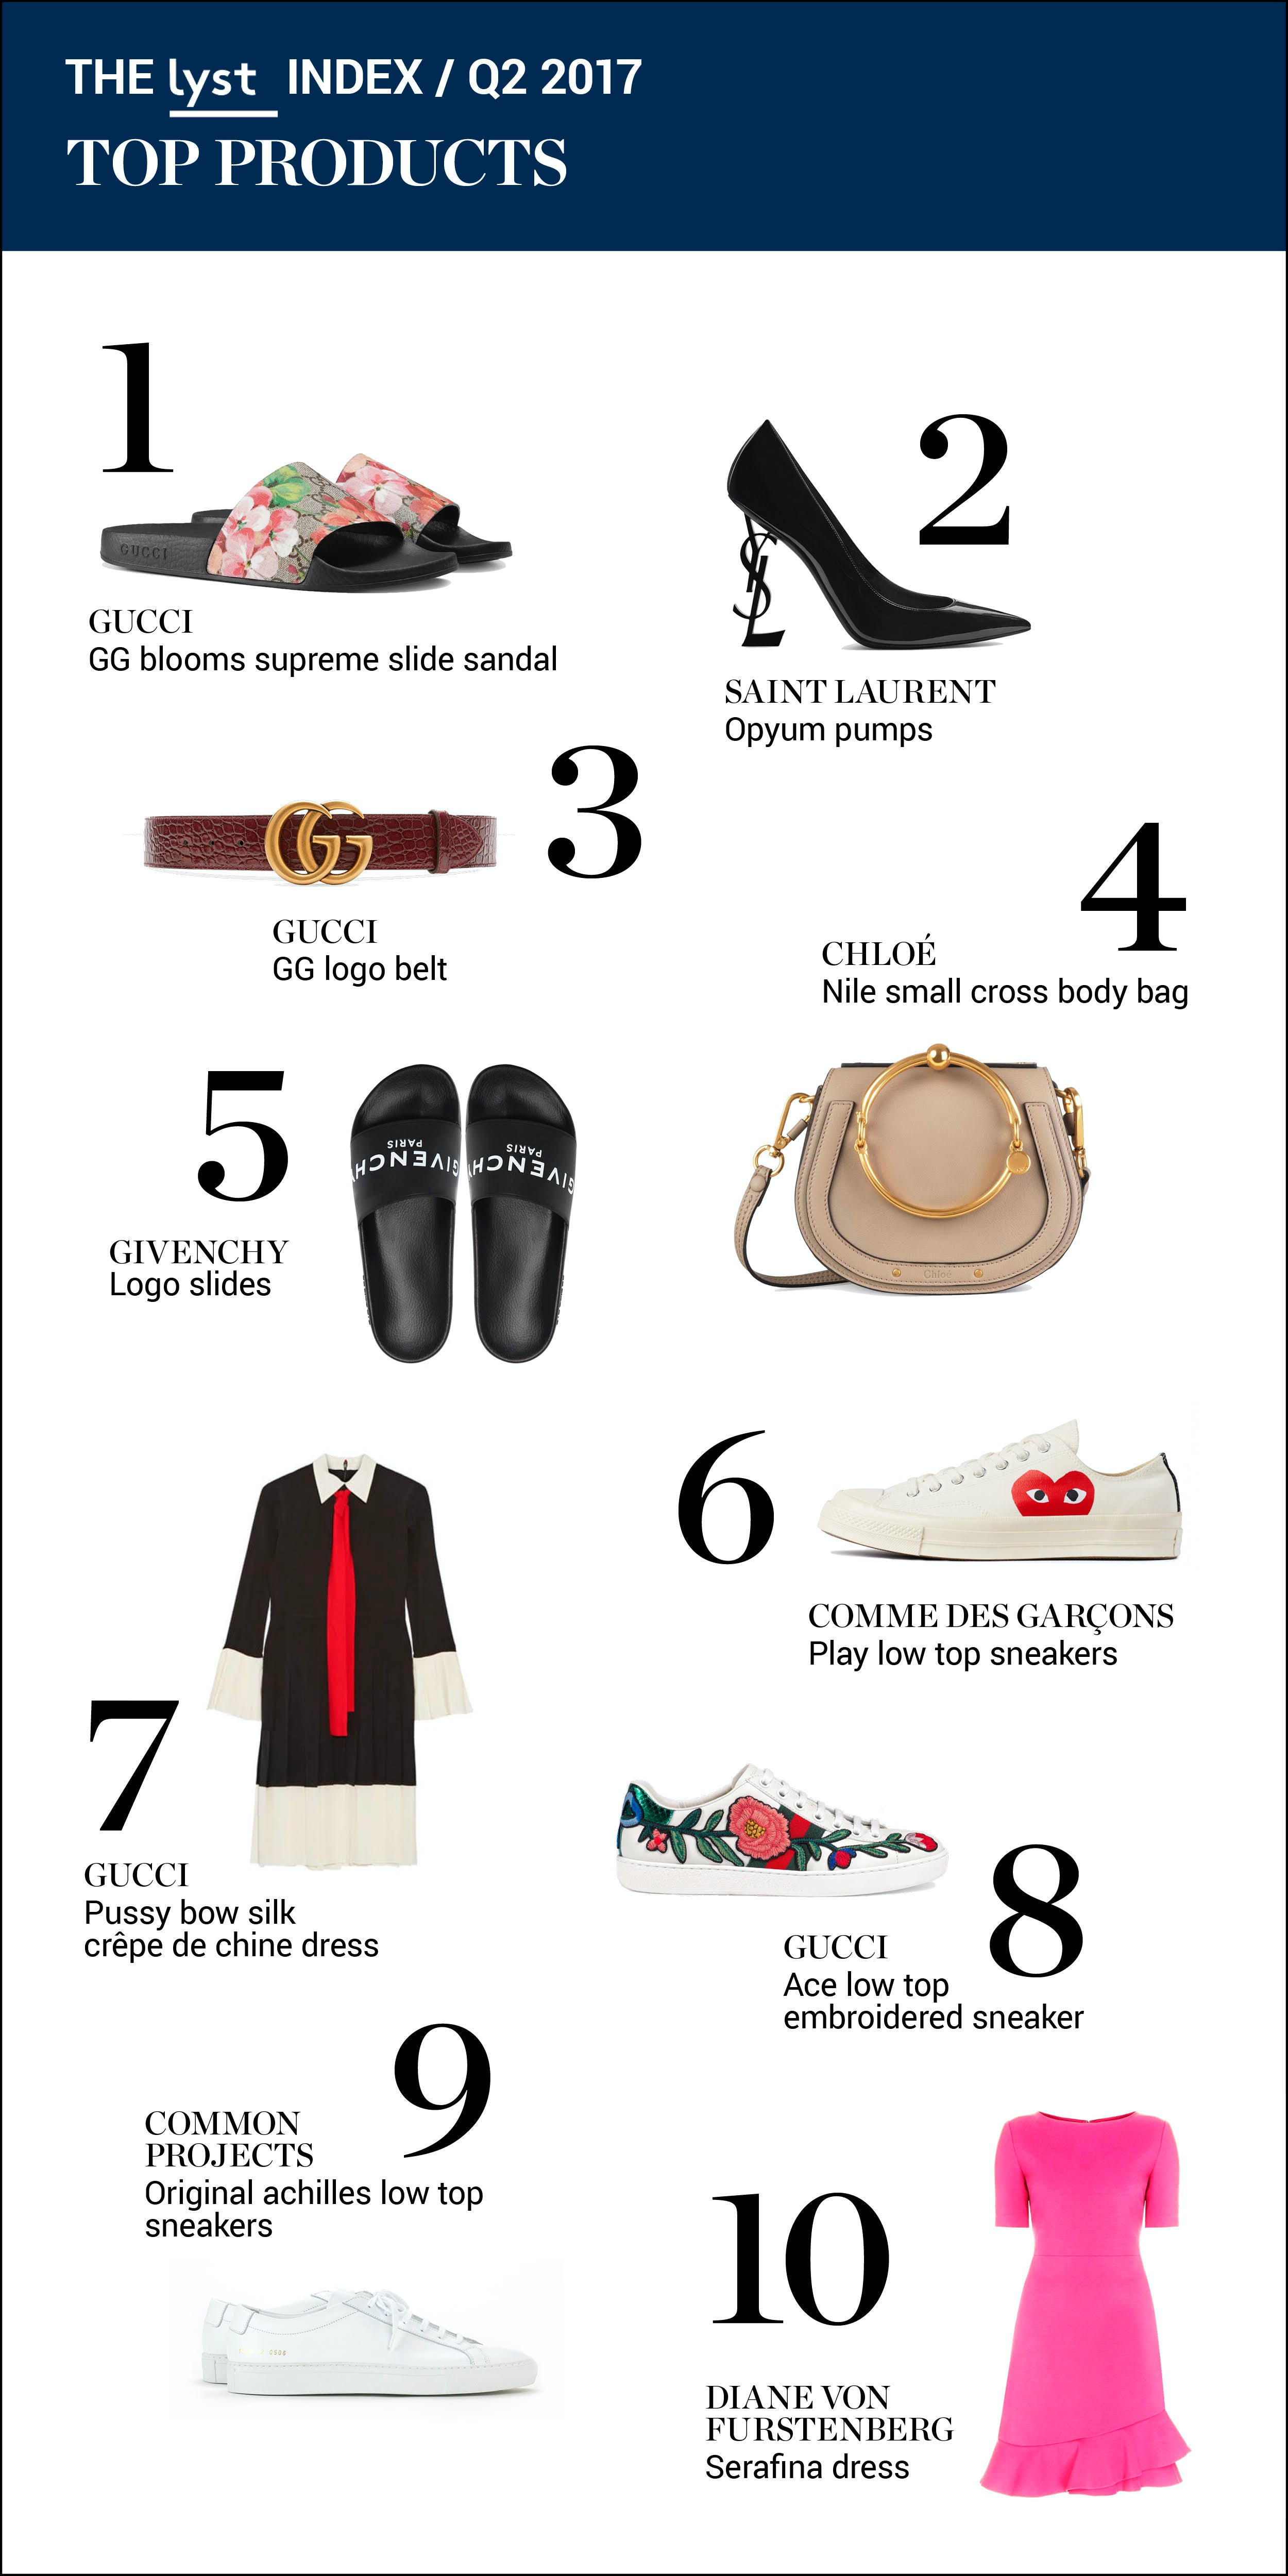 The 10 Most Expensive Gucci Items Ever Sold